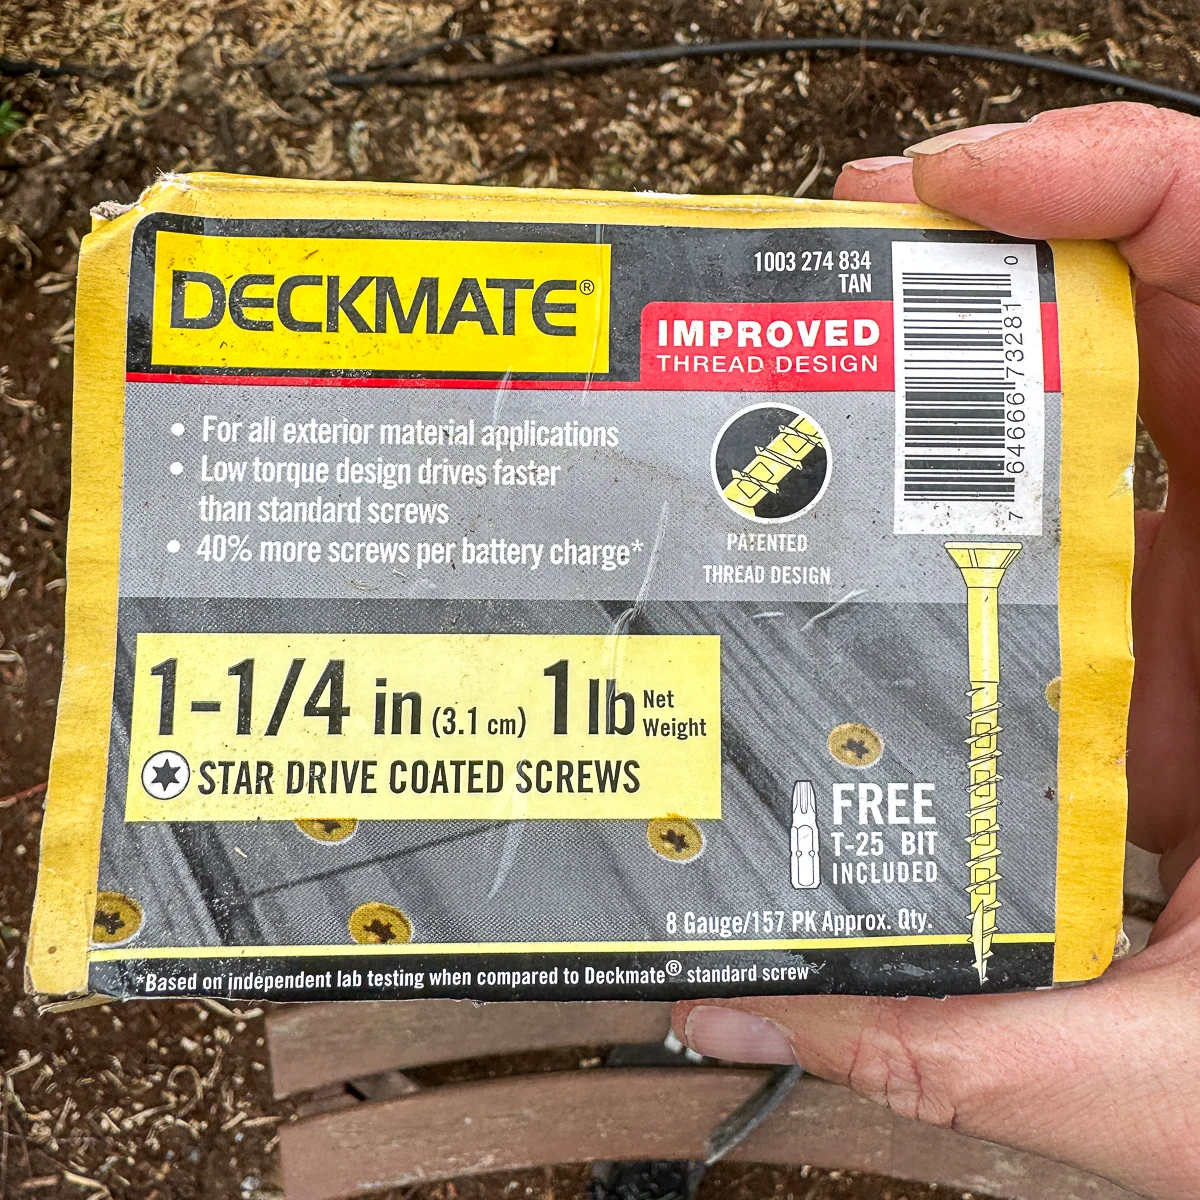 Deckmate screws used to secure fence panels to rails